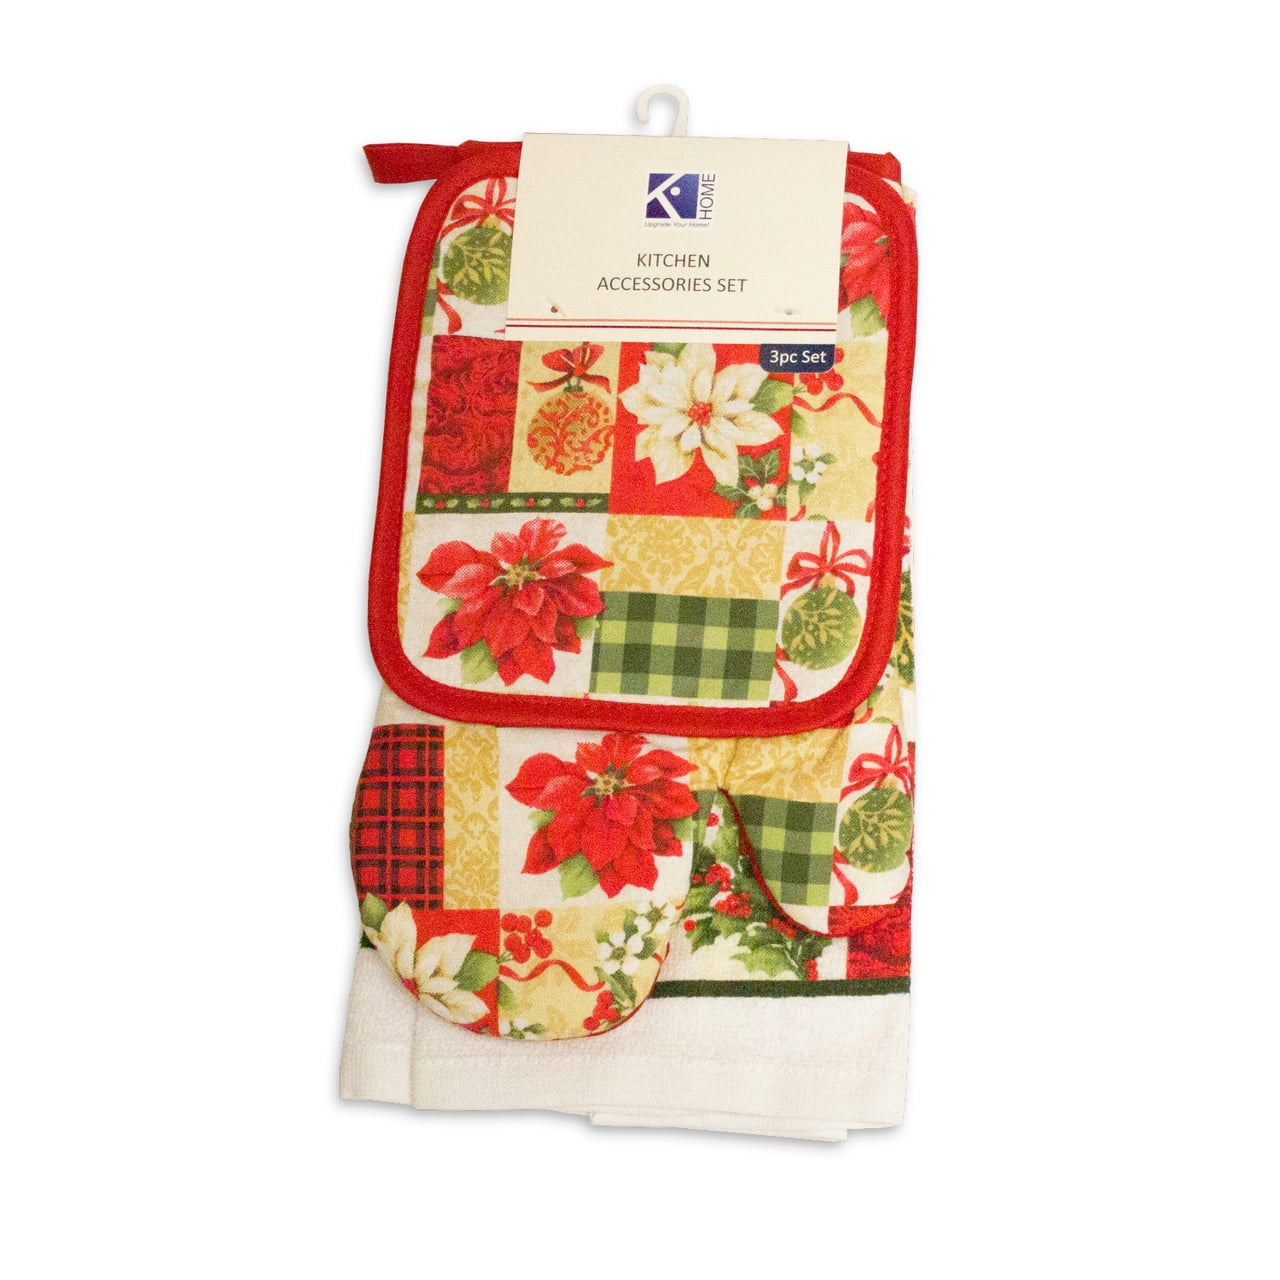 Details about  / 5 PC KITCHEN SET RED ROSES Oven Mitt Potholders Towels Dishcloths